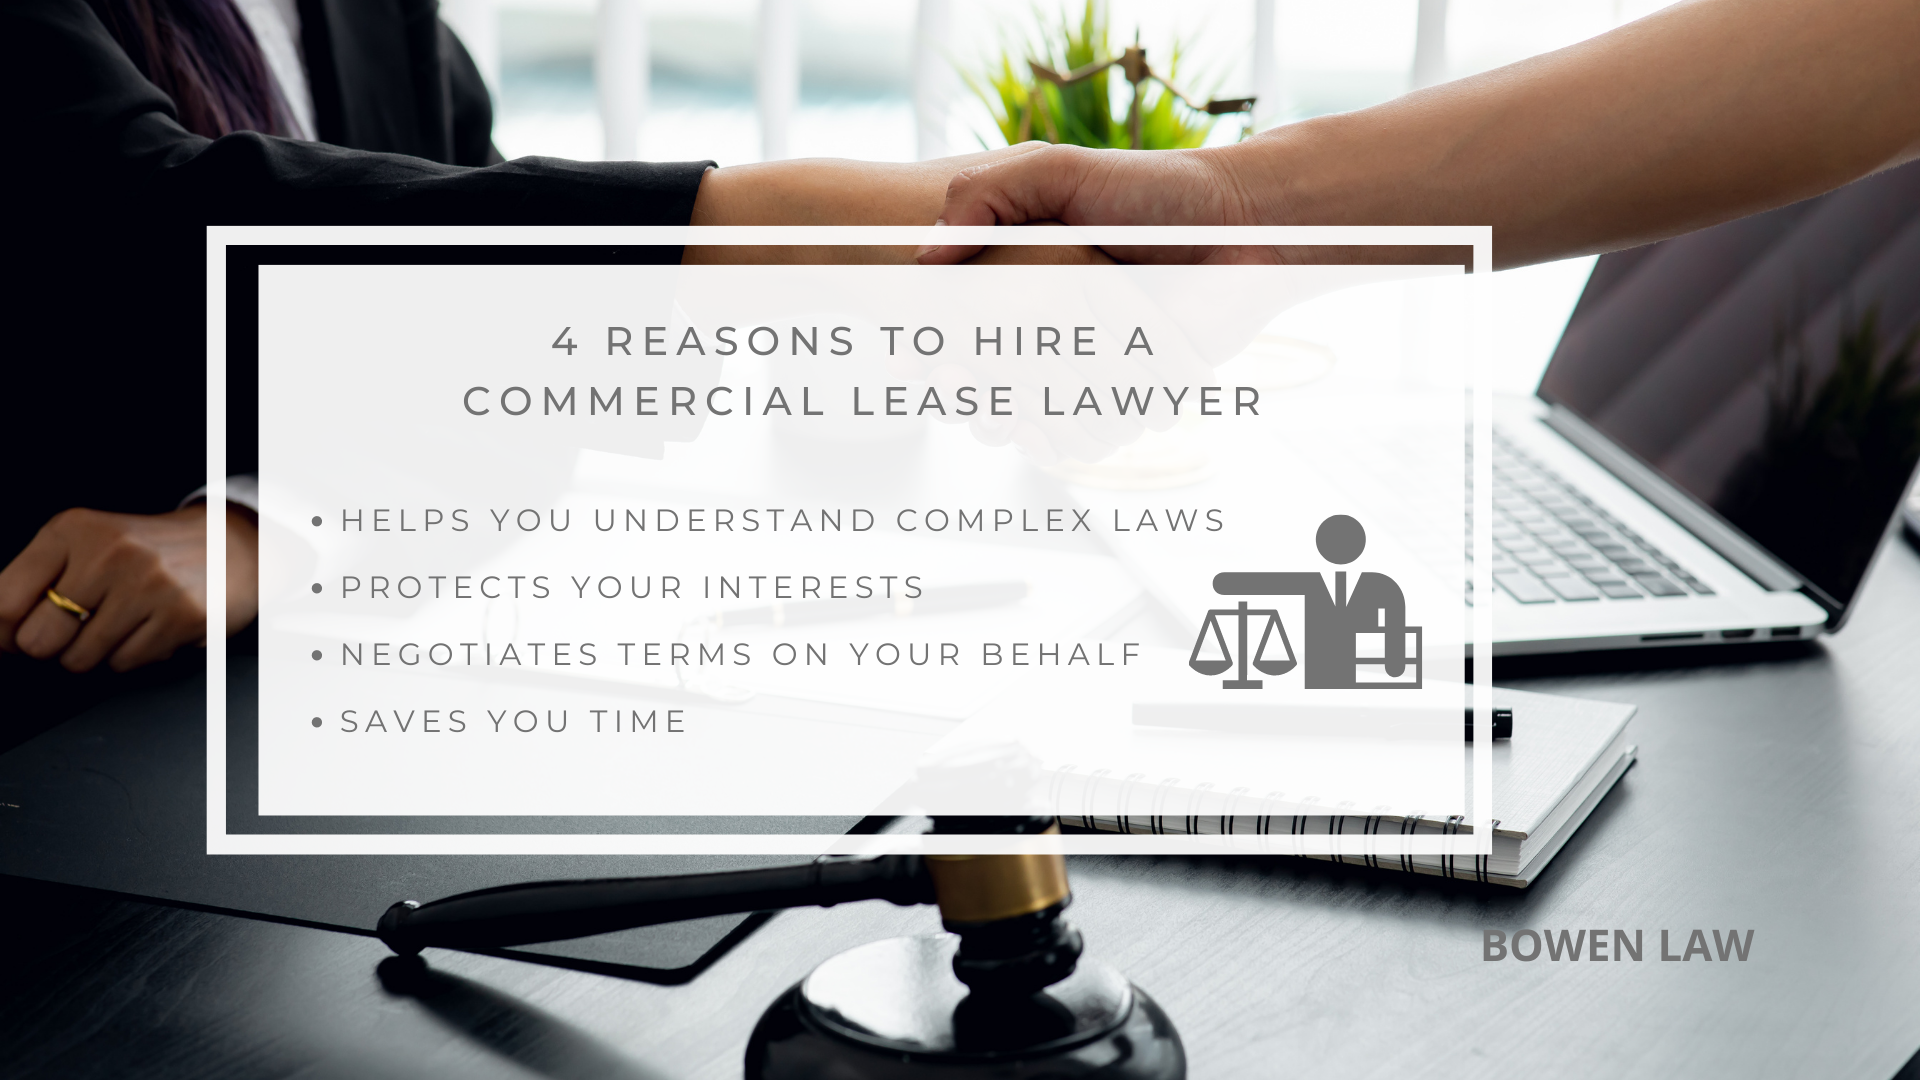 Infographic image of 4 reasons to hire a commercial lease lawyer